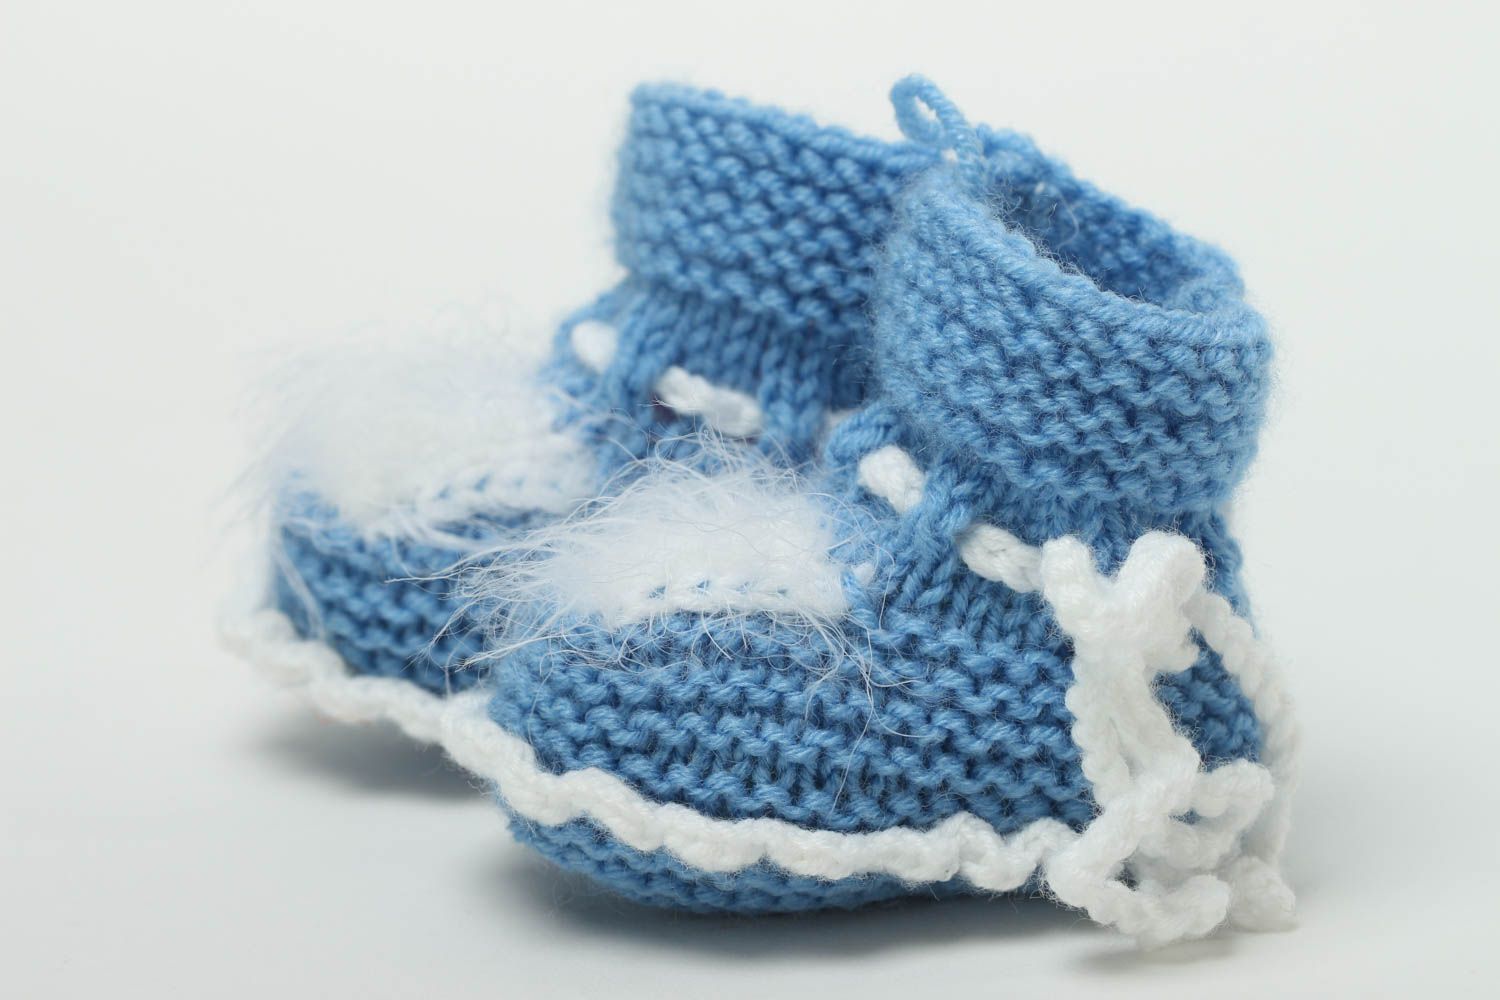 Cute handmade baby bootees warm baby booties crochet ideas gifts for kids photo 2